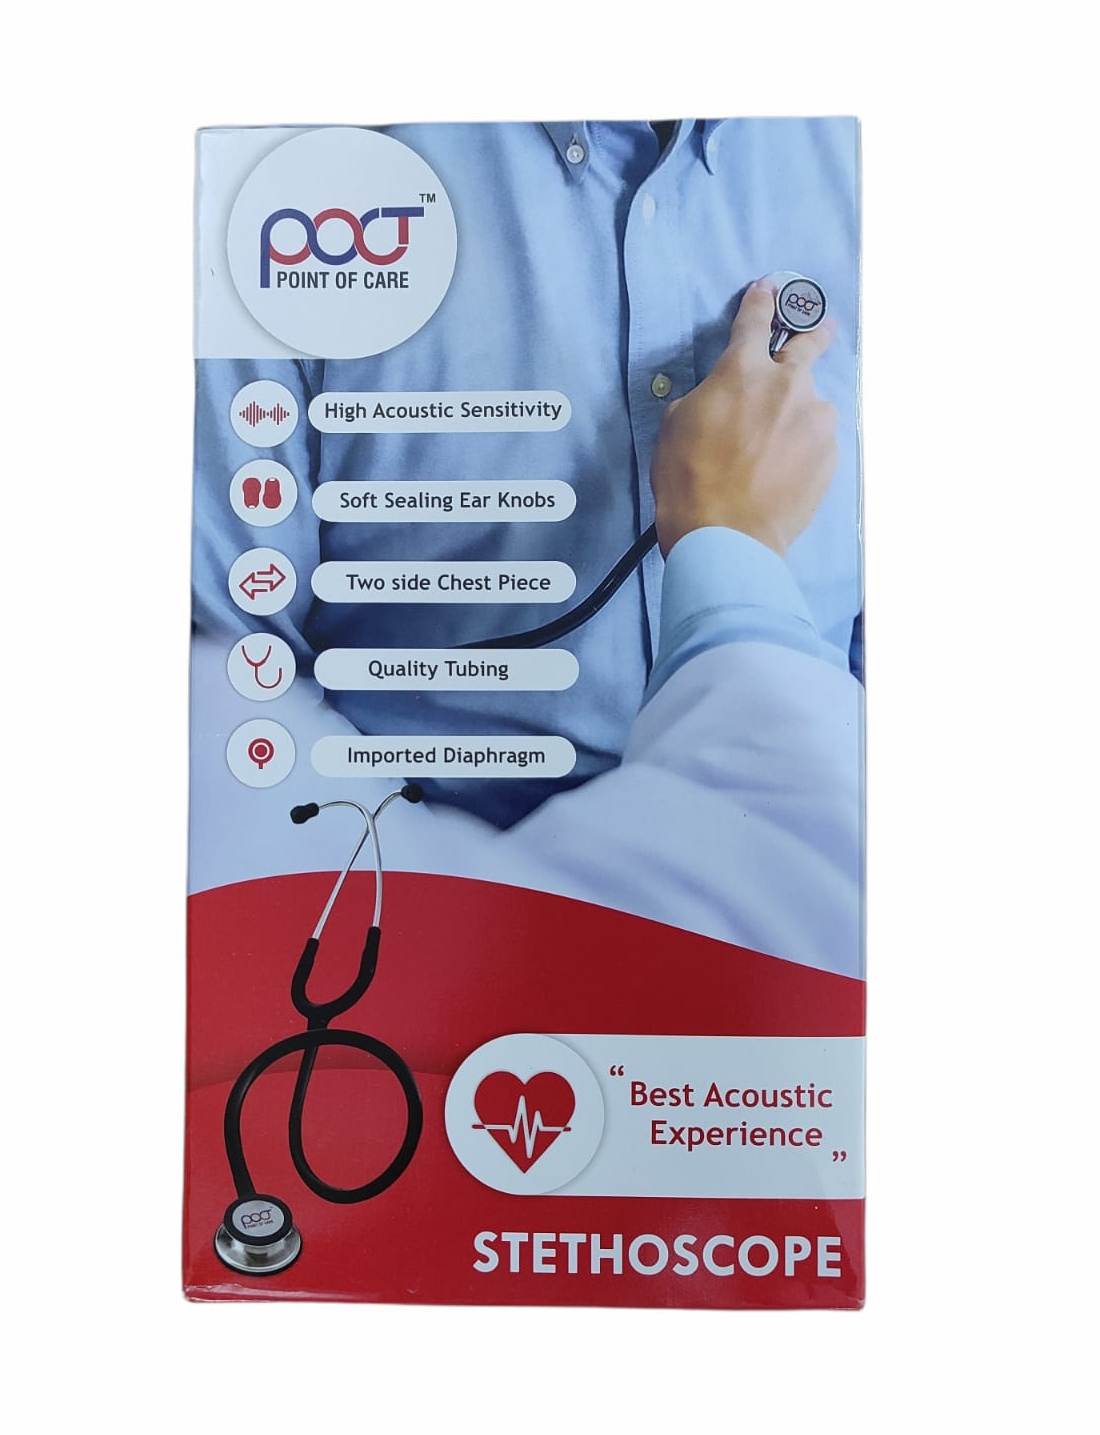 POCT (Point Of Care ) Stethoscope PS-10